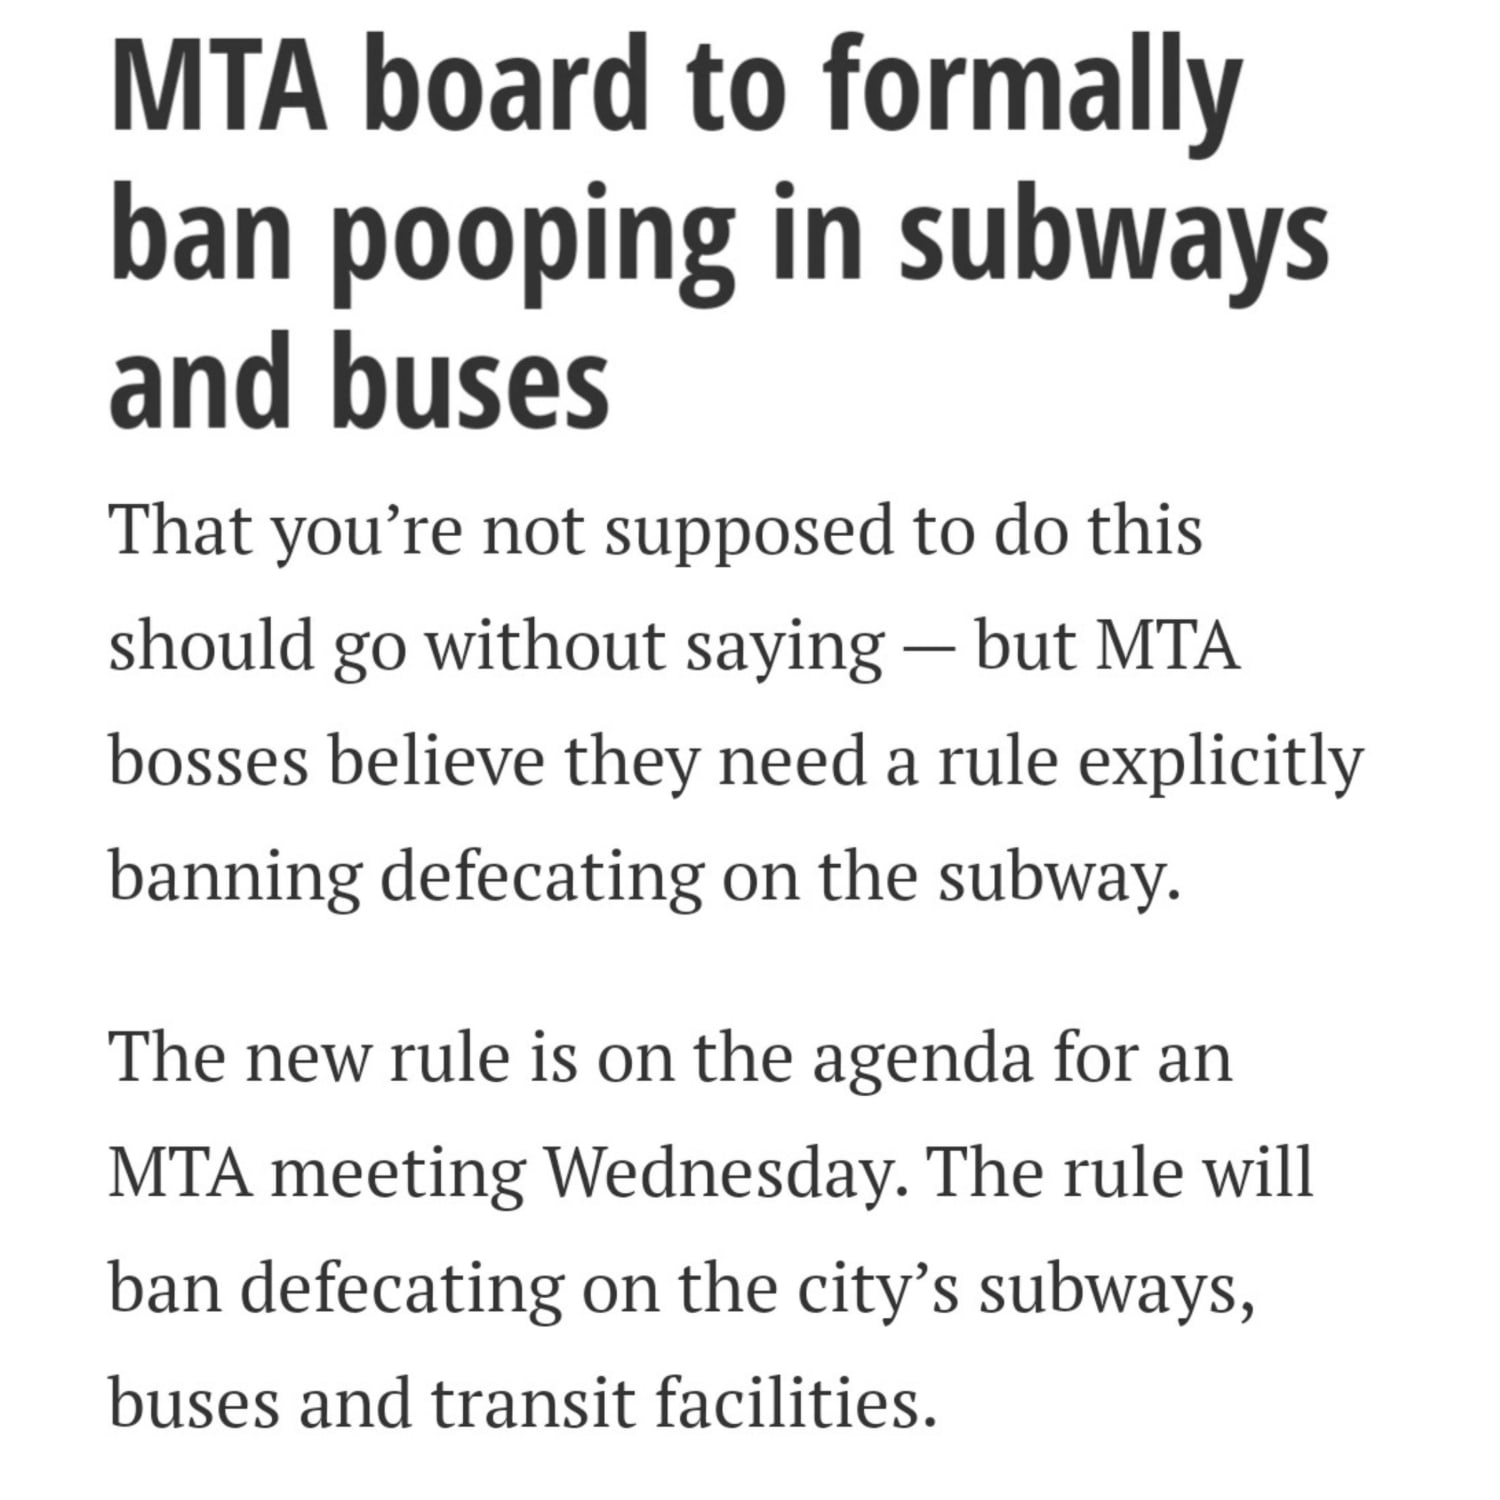 Where are our subway creatures suppose to go now?